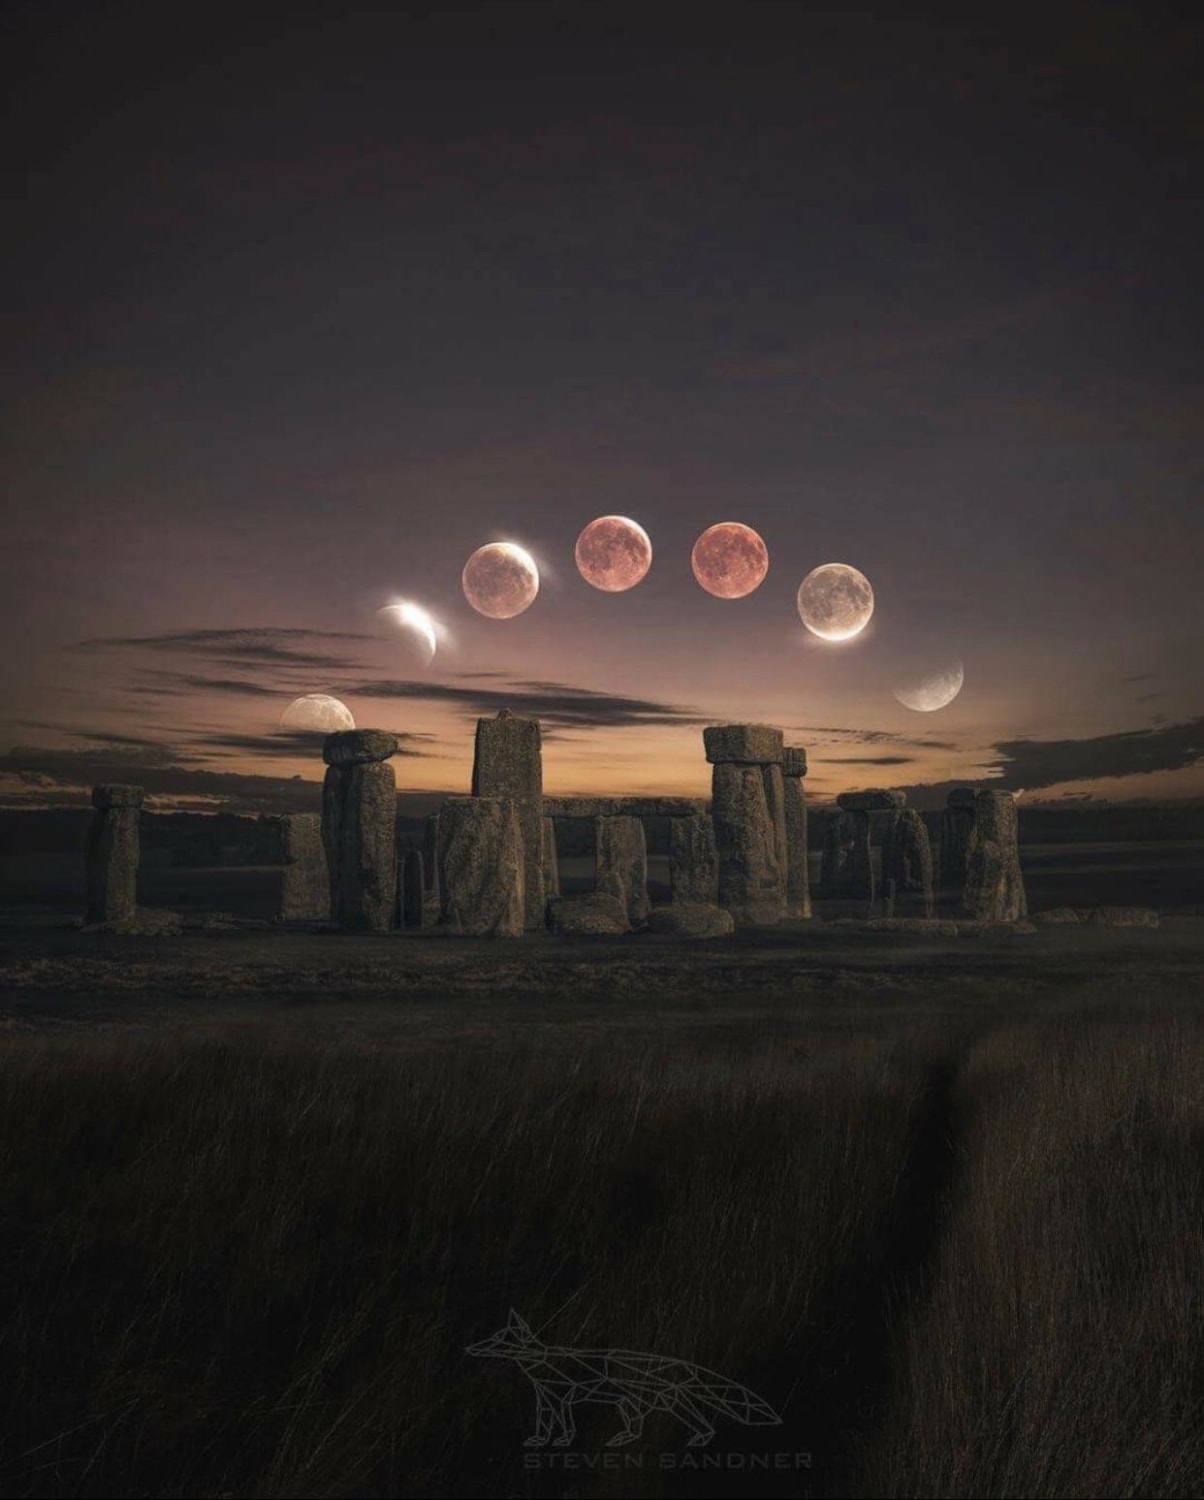 Blood Moon Eclipse over Stonehenge using 35 pictures to complete the image